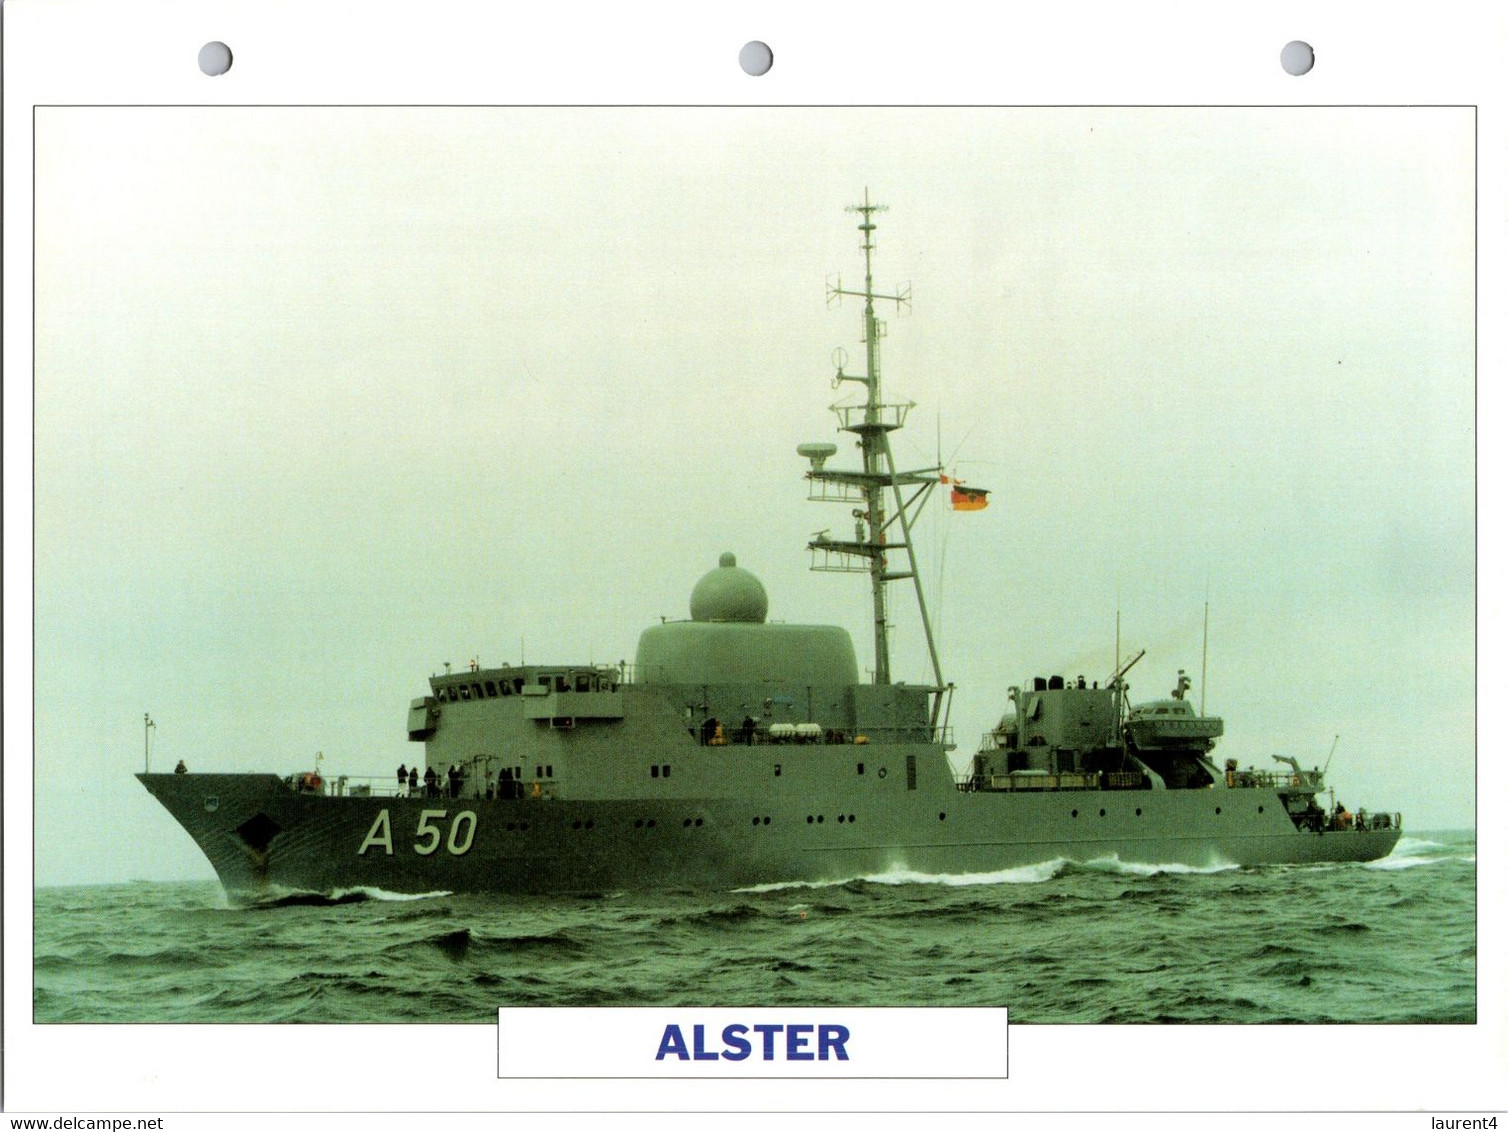 (25 X 19 Cm) (29-9-2021) - V - Photo And Info Sheet On Warship -  Germany Navy - Alster - Boats